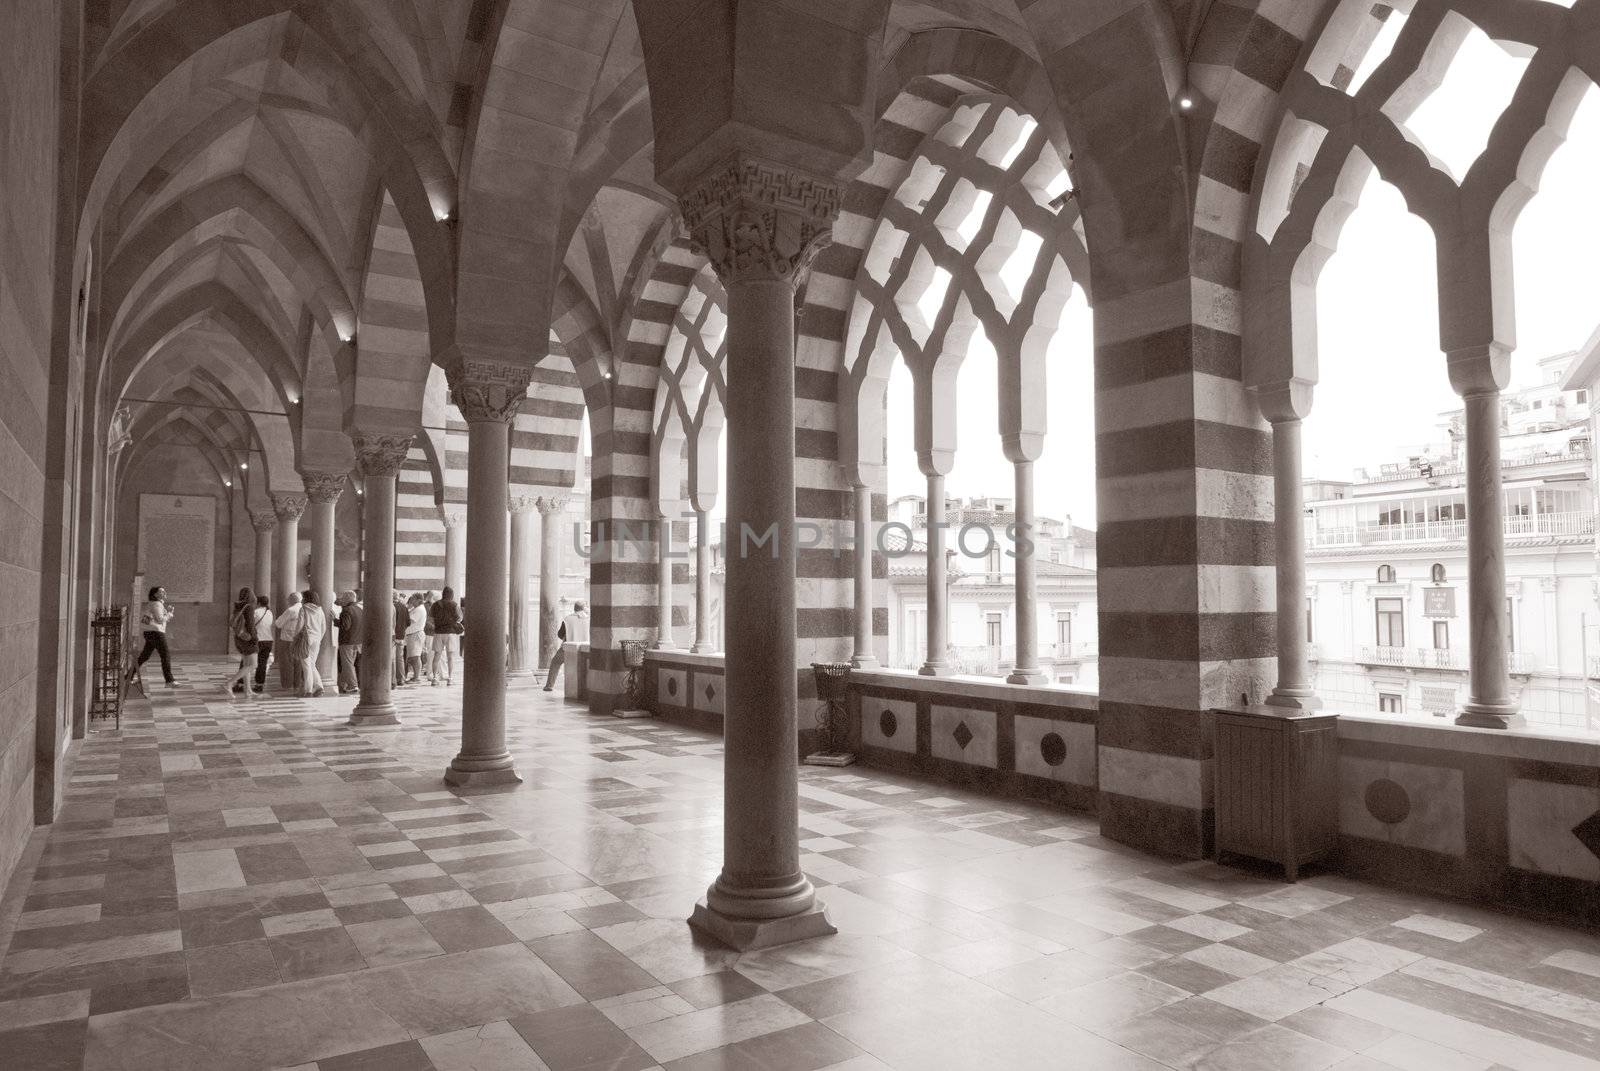 patterned architecture columns and floor amalfi, italy with tour group in background by itsrich